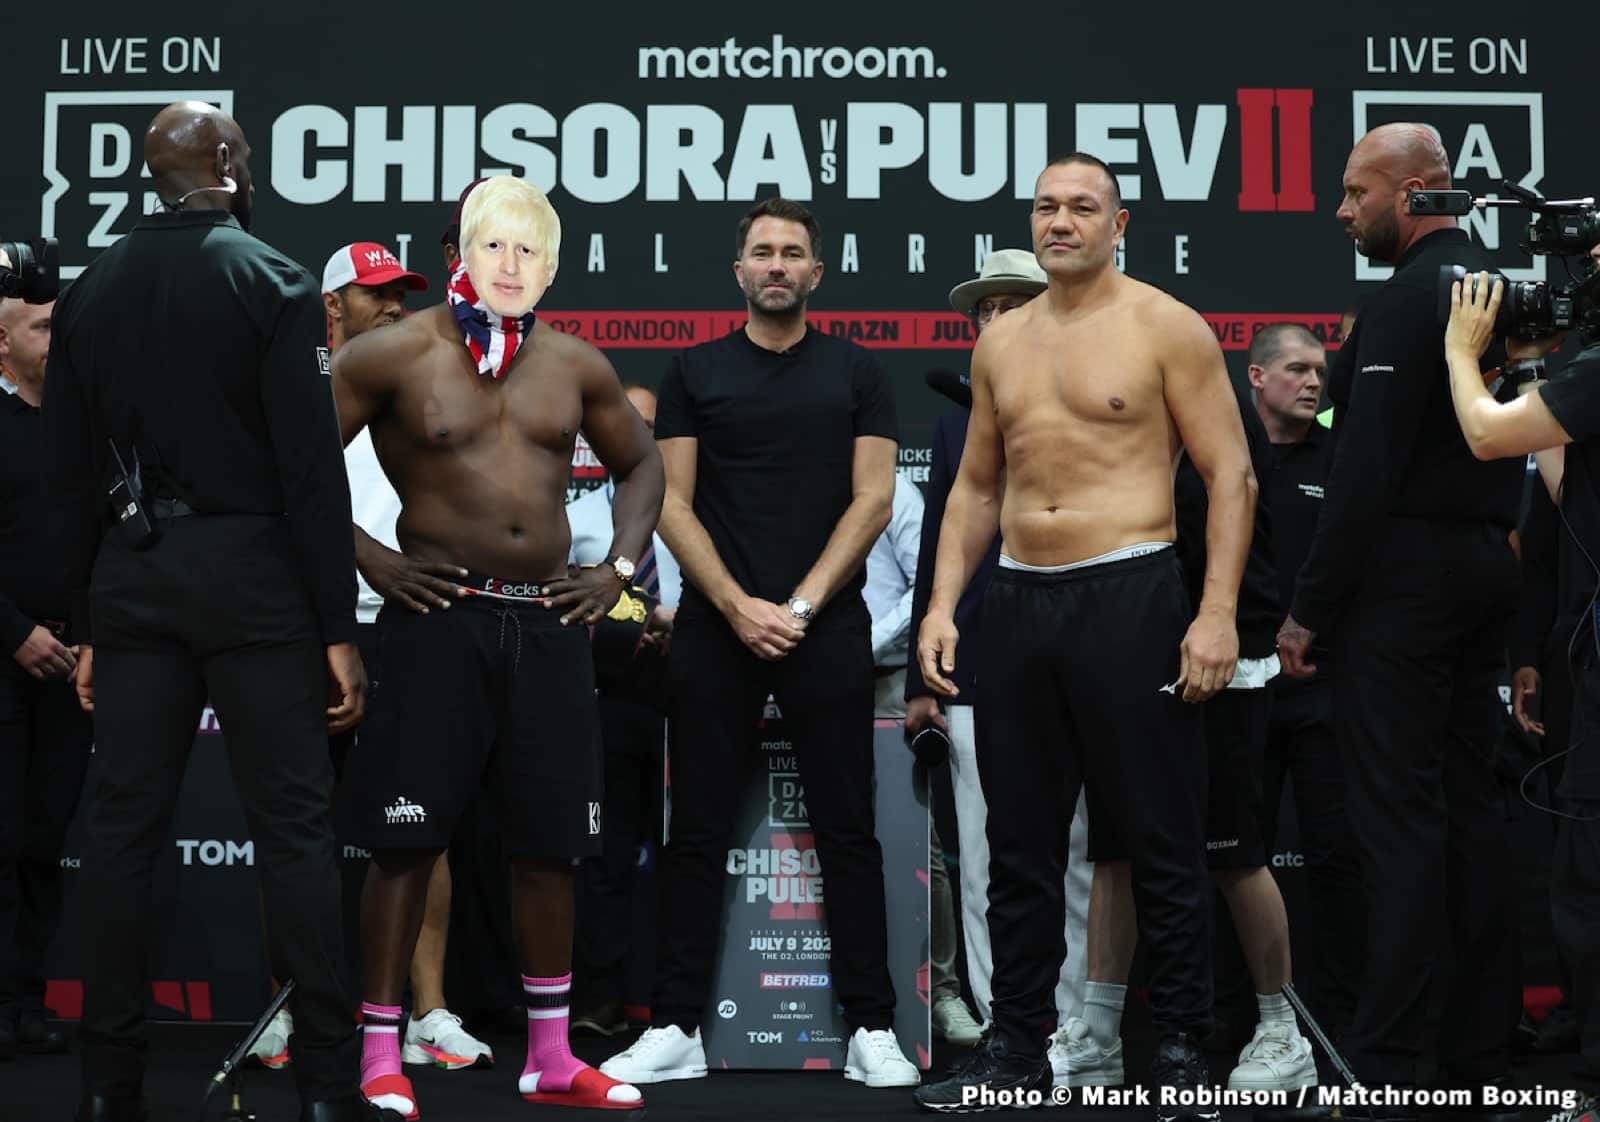 Image: "Dereck Chisora is going to win" against Pulev predicts David Haye